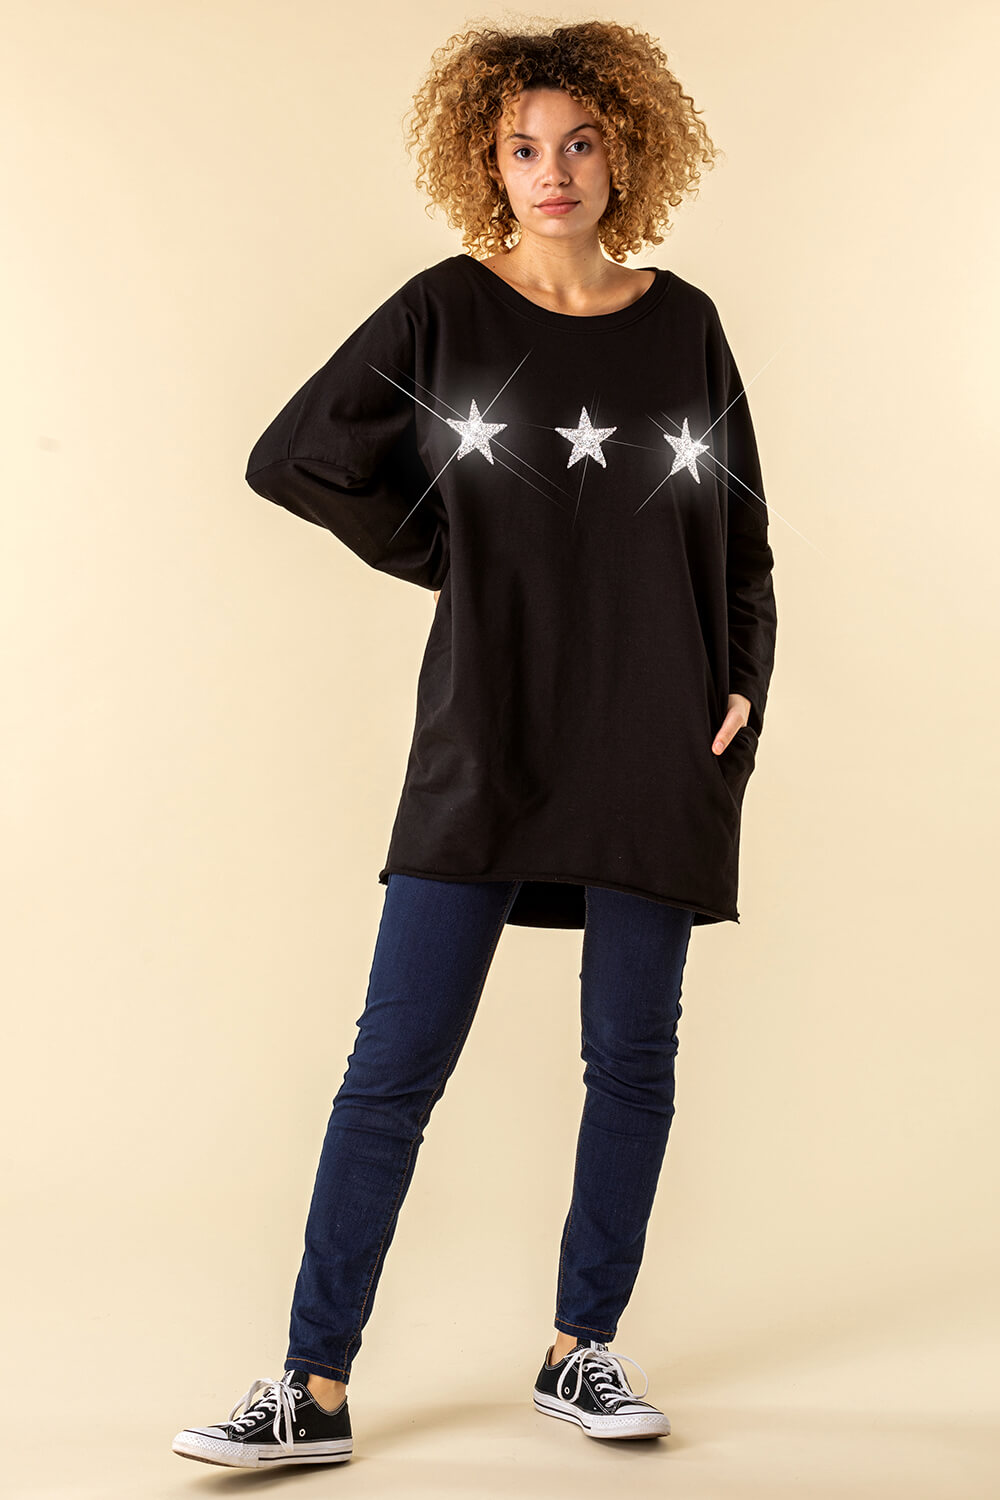 Black One Size Long Sleeve Sequin Star Top, Image 2 of 4